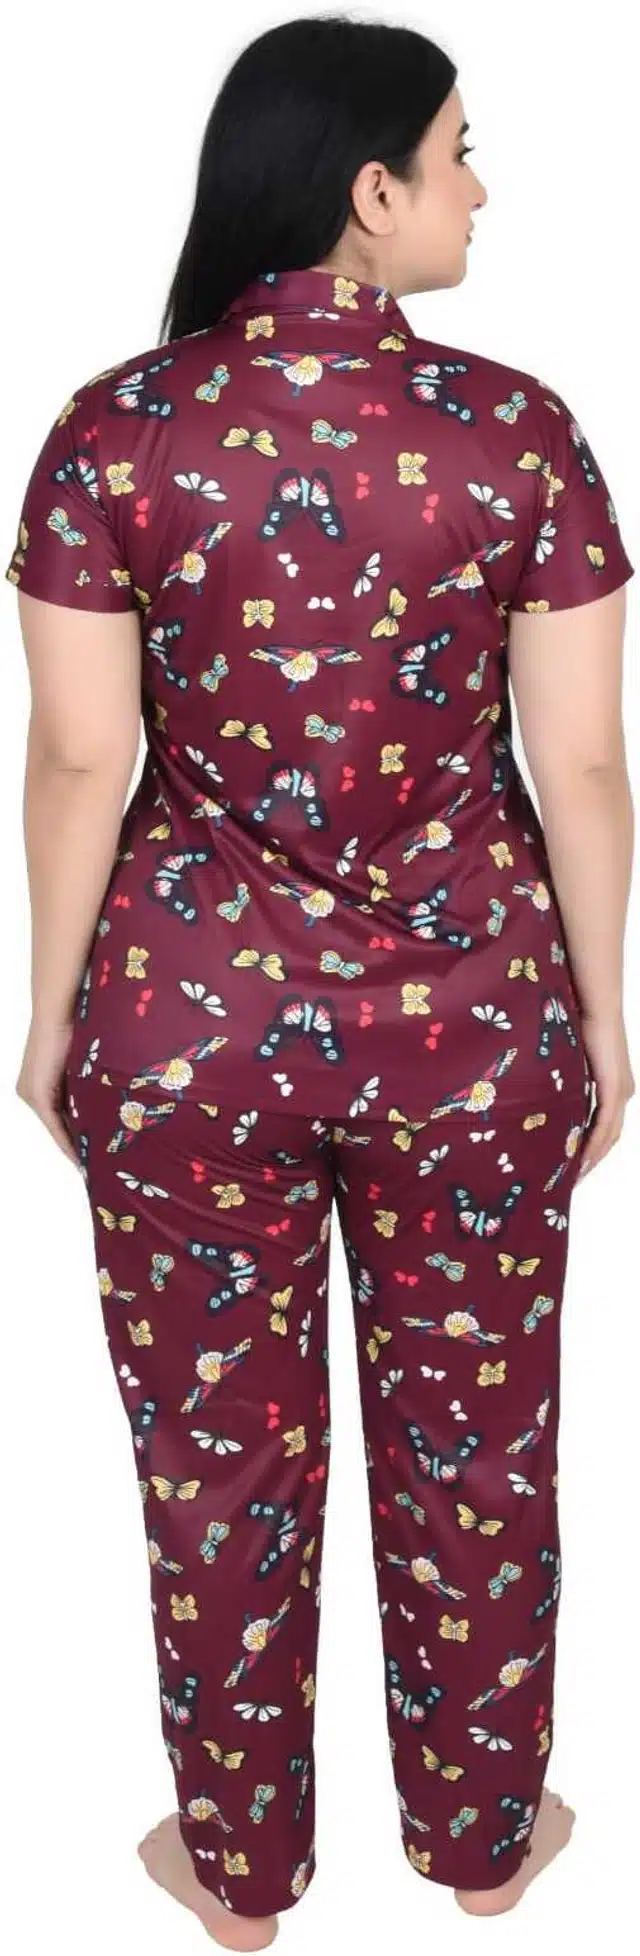 Satin Printed Night Suit for Women (Maroon, Free)